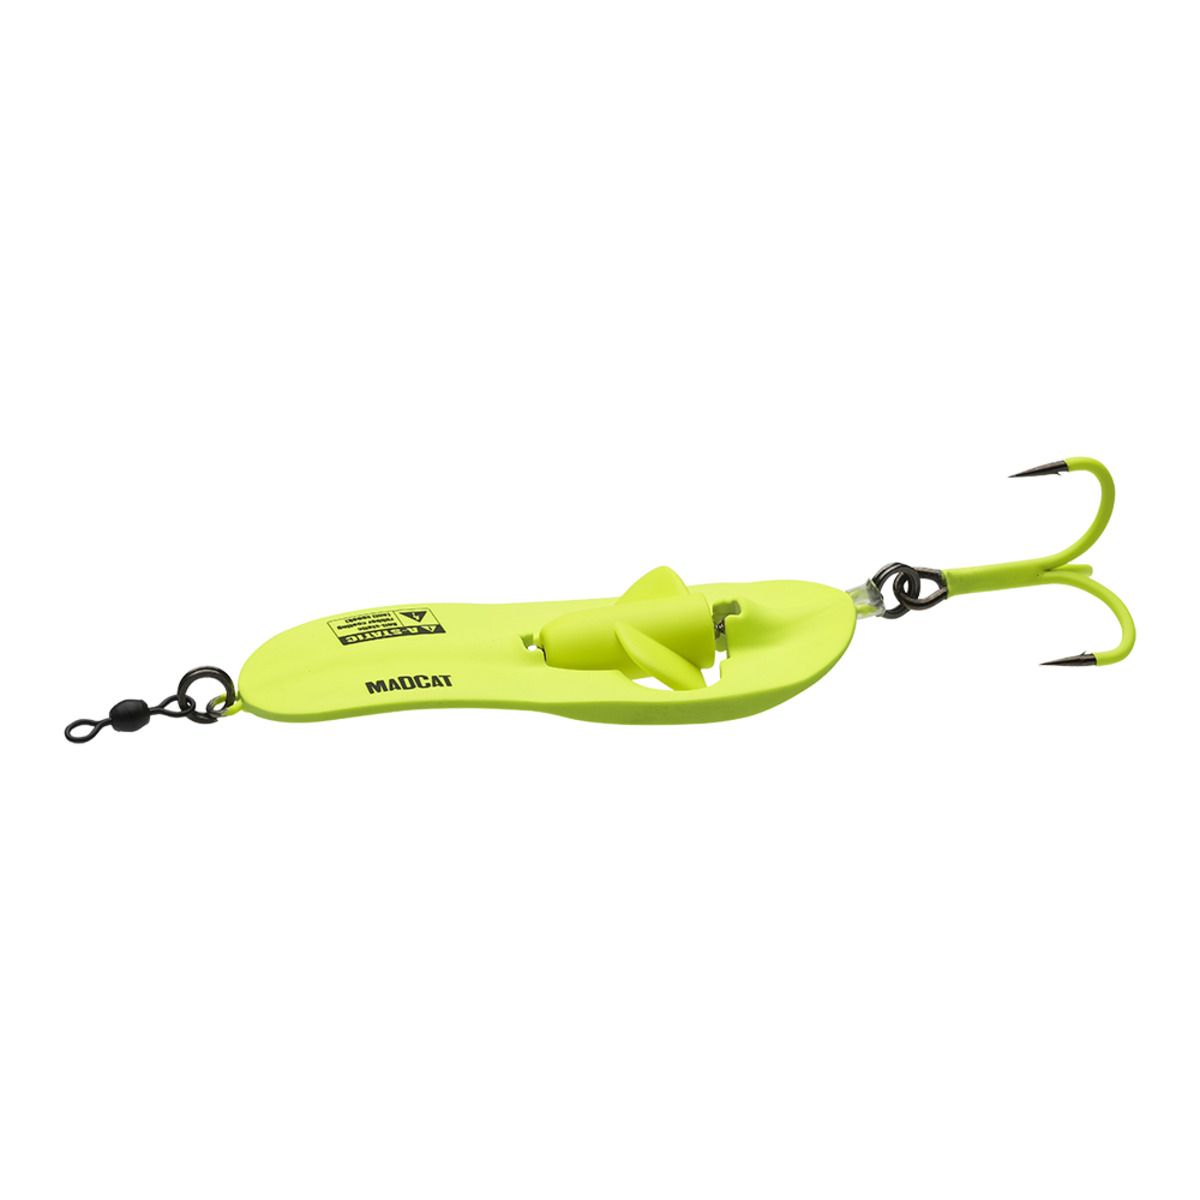 Madcat A-static Ratlin Ft Spoon 3/0 110g Sinking - FLUO YELLOW UV